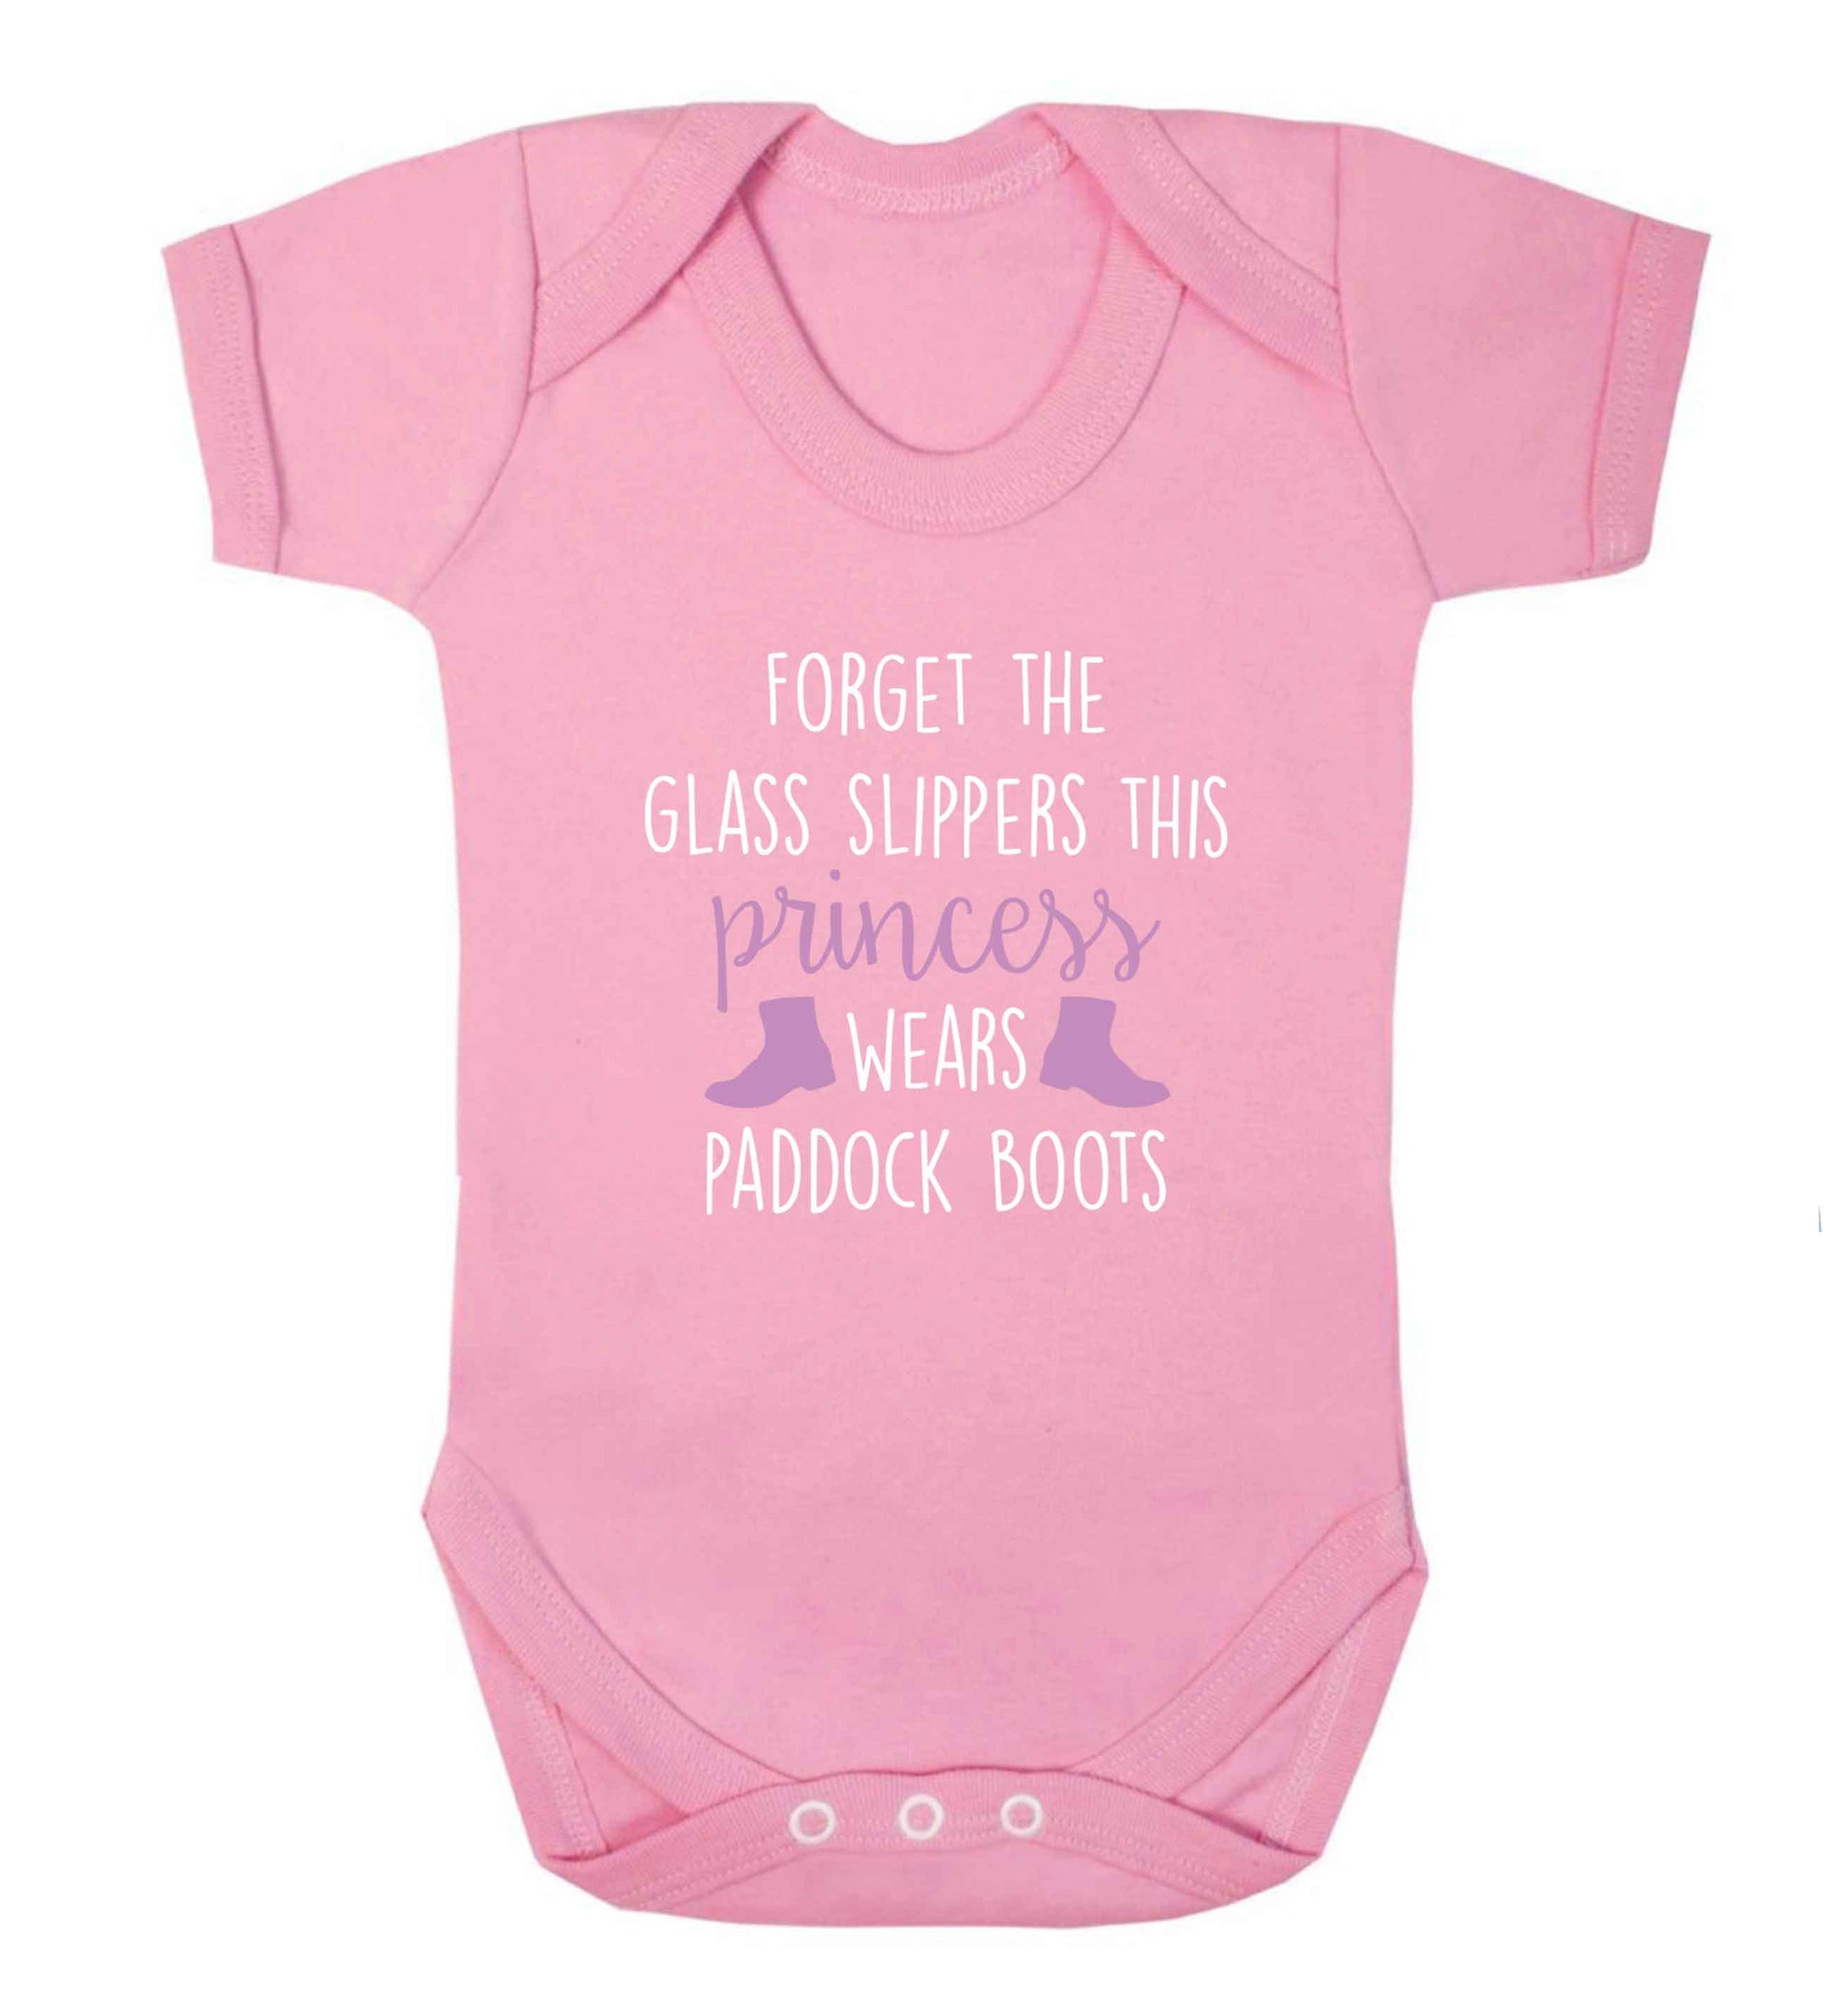 Forget the glass slippers this princess wears paddock boots baby vest pale pink 18-24 months